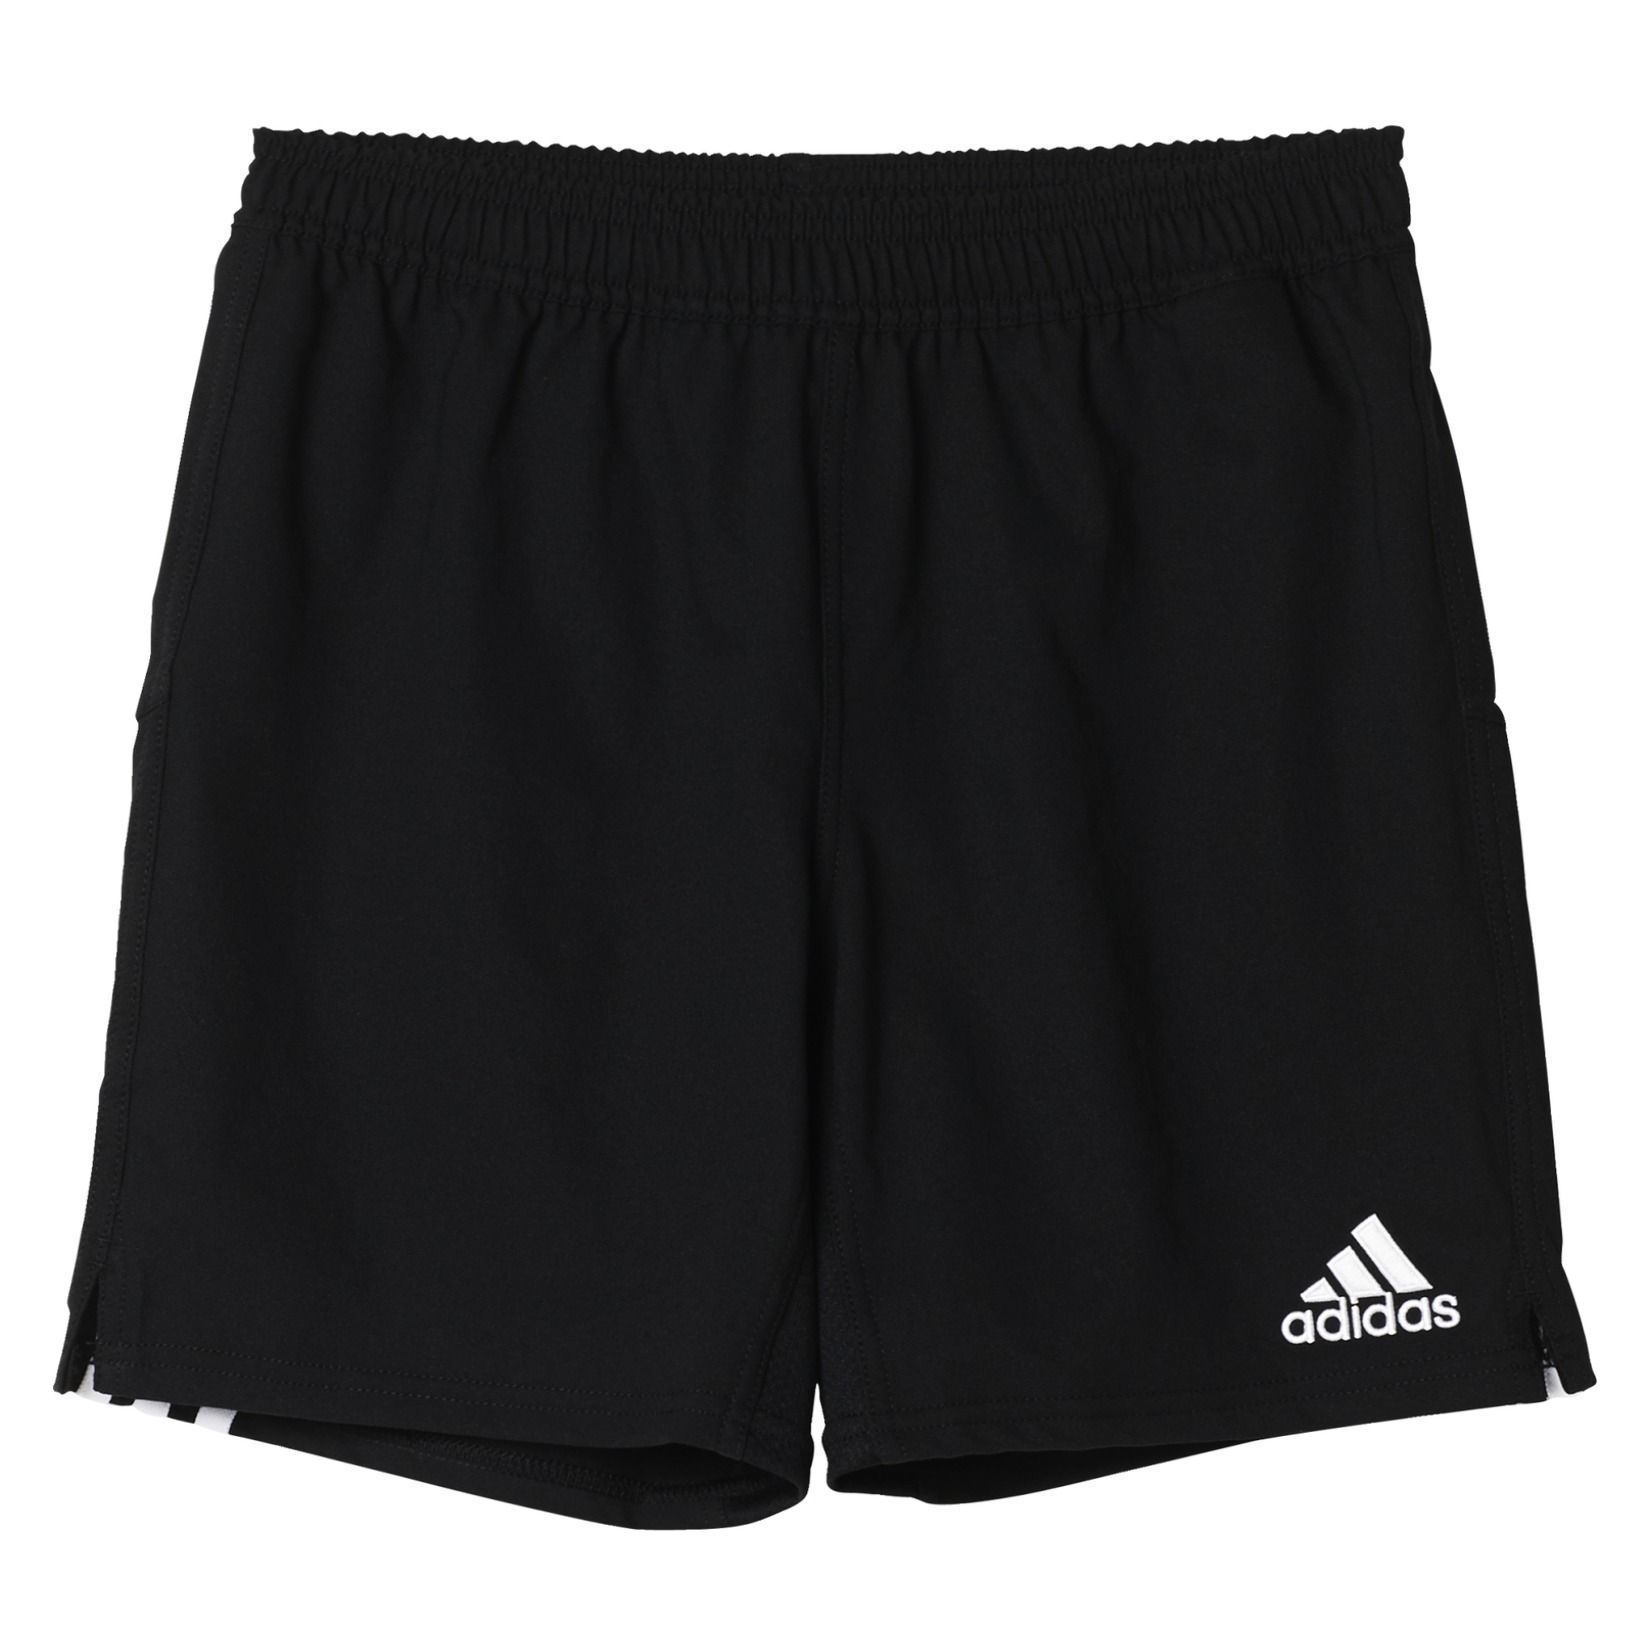 adidas Kids Classic 3s Rugby Short